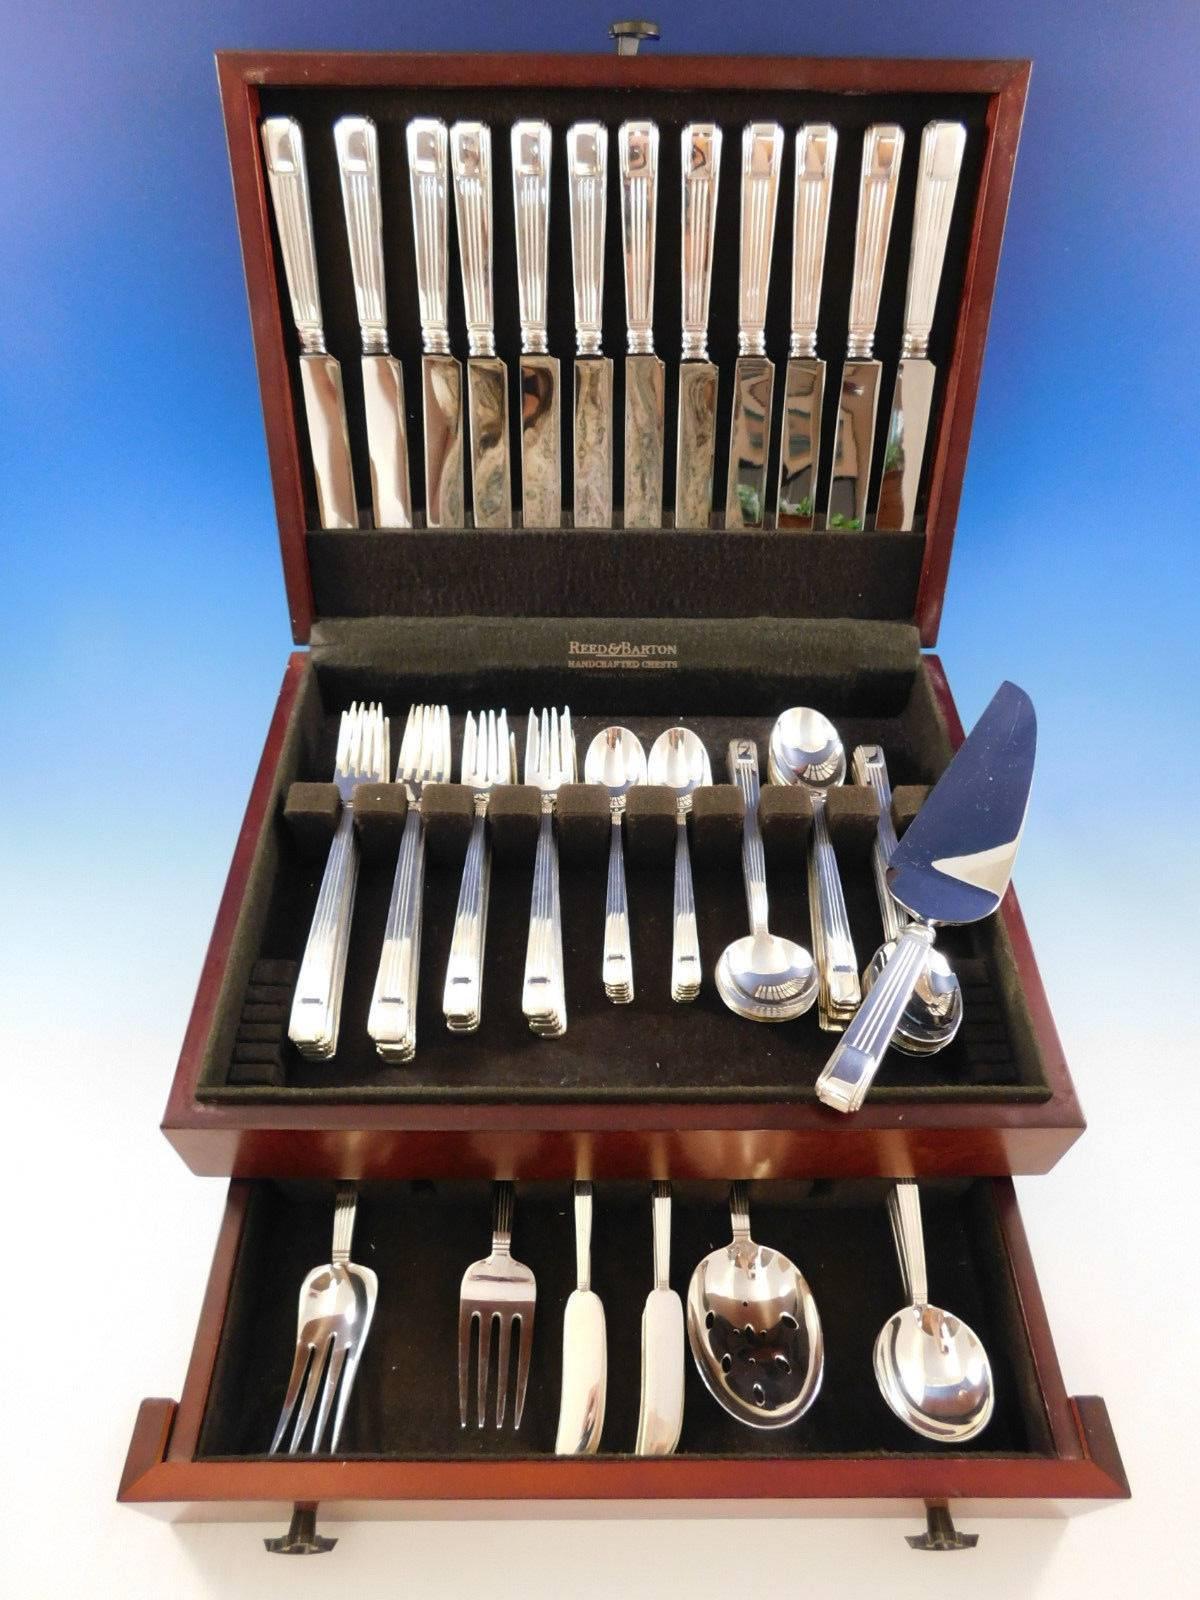 Outstanding dinner size century by Tiffany & Co. sterling silver flatware set, 88 pieces. This set includes:

12 dinner size knives, 10 1/4